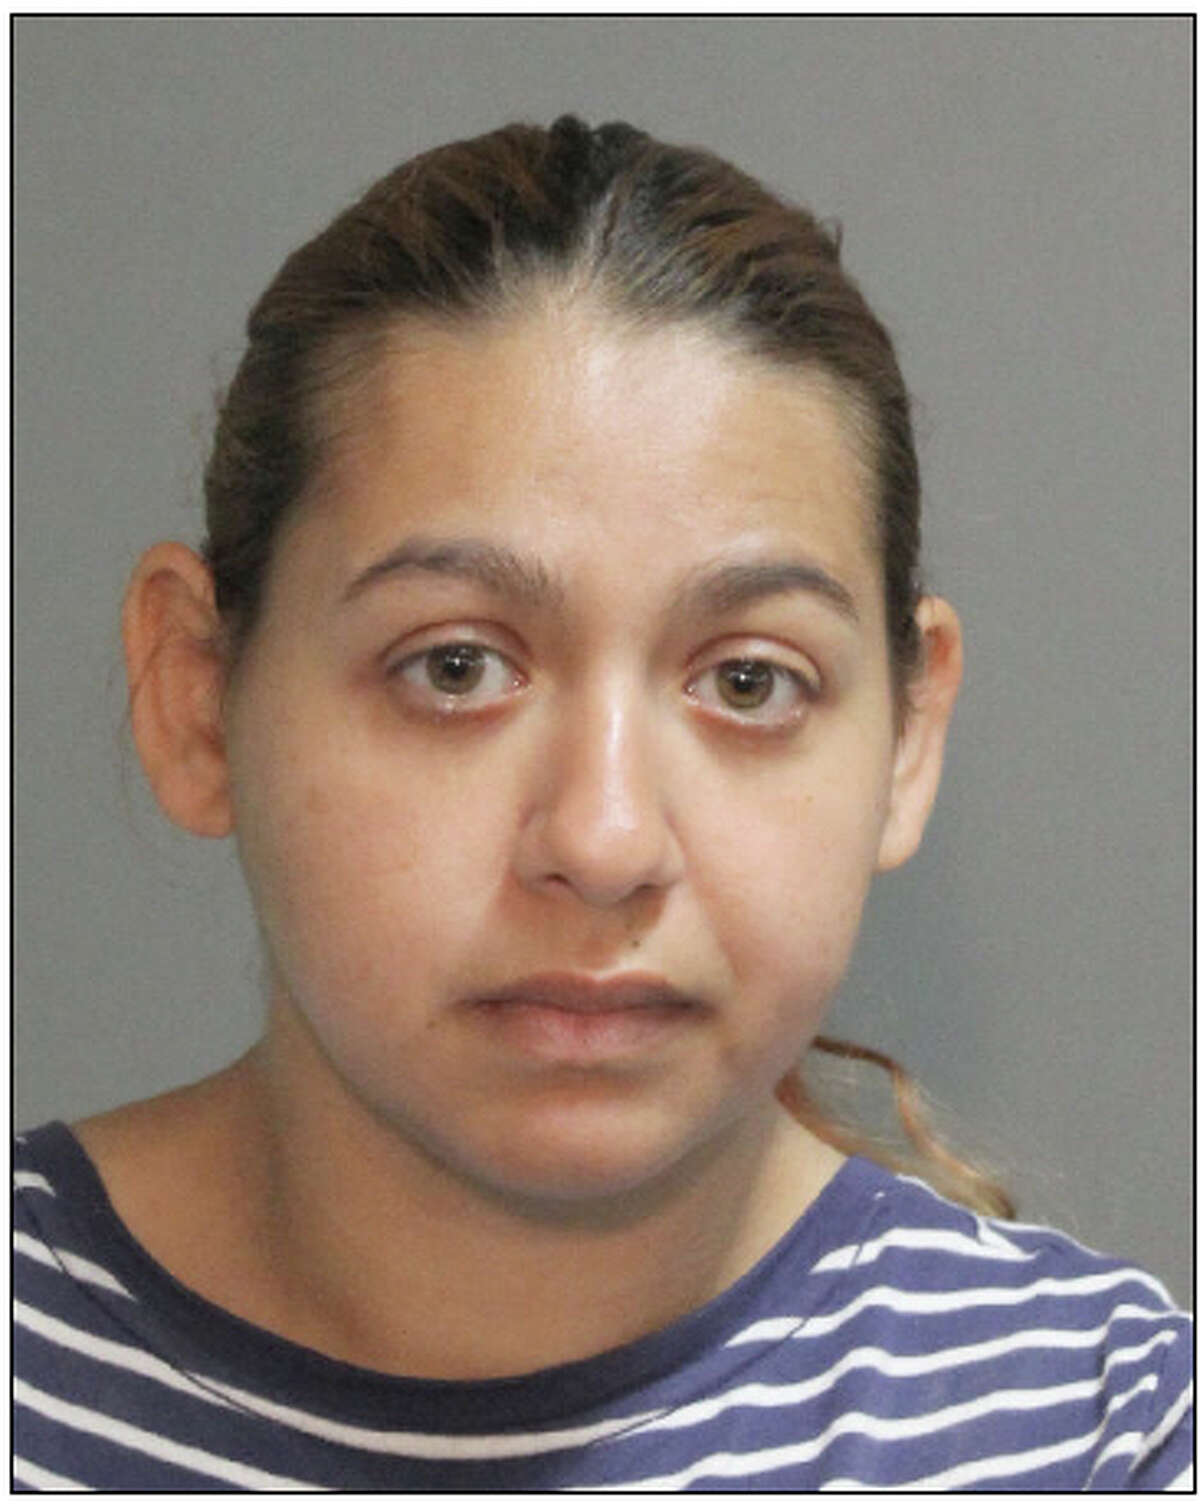 Patricia Steve, a 29-year-old transient, is being held without bail on suspicion of child abuse after her infant son was found with a fractured skull.